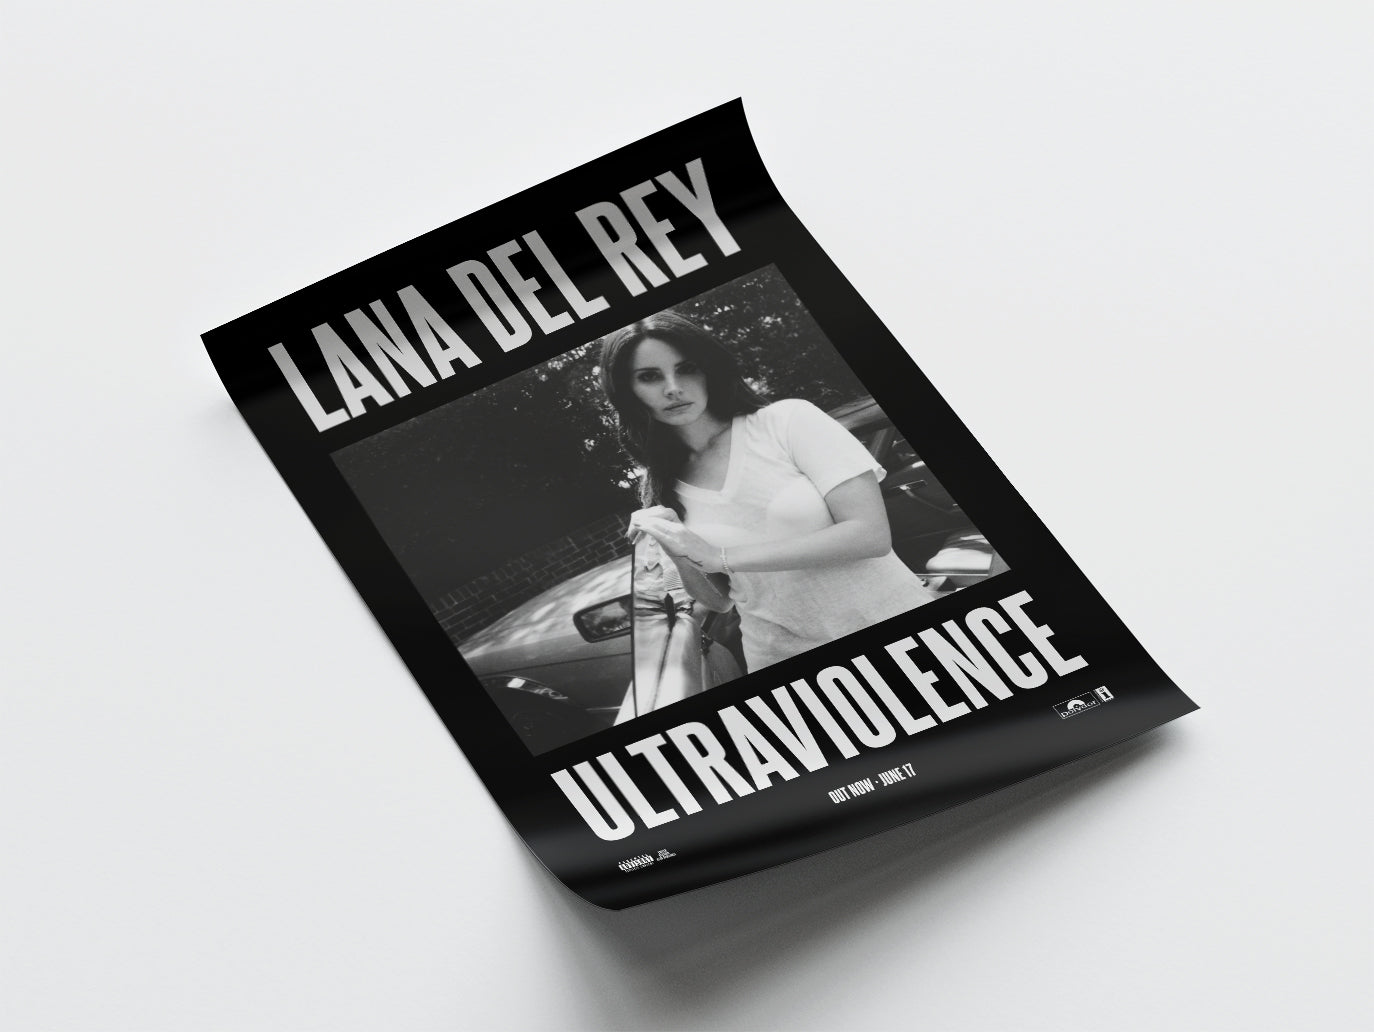 Lana Del Rey 'Ultraviolence' Poster – The Indie Planet